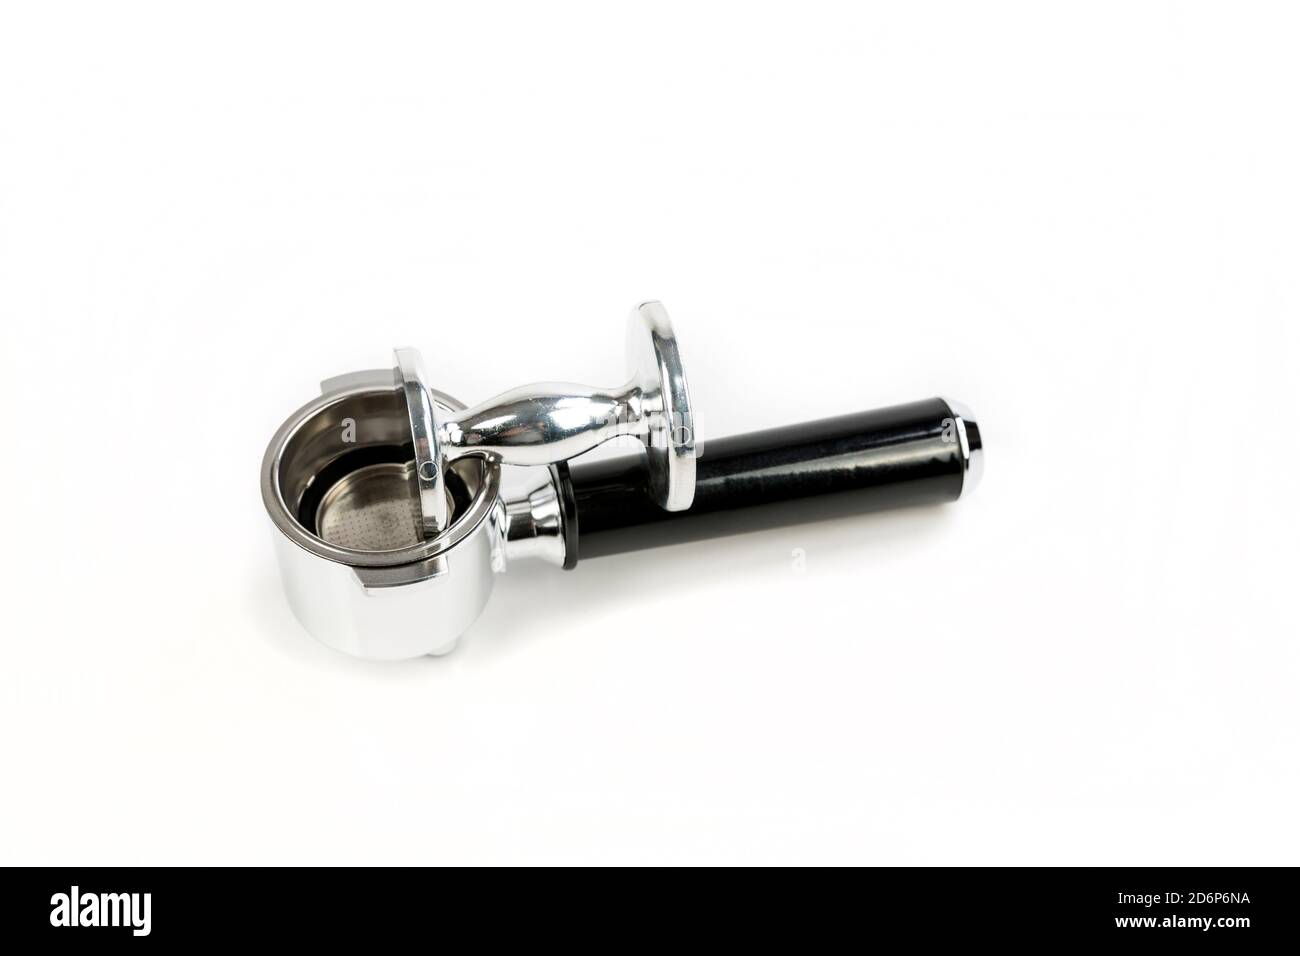 Black and silver coffee filter holder with a metal coffee tamper laying on top side view Stock Photo